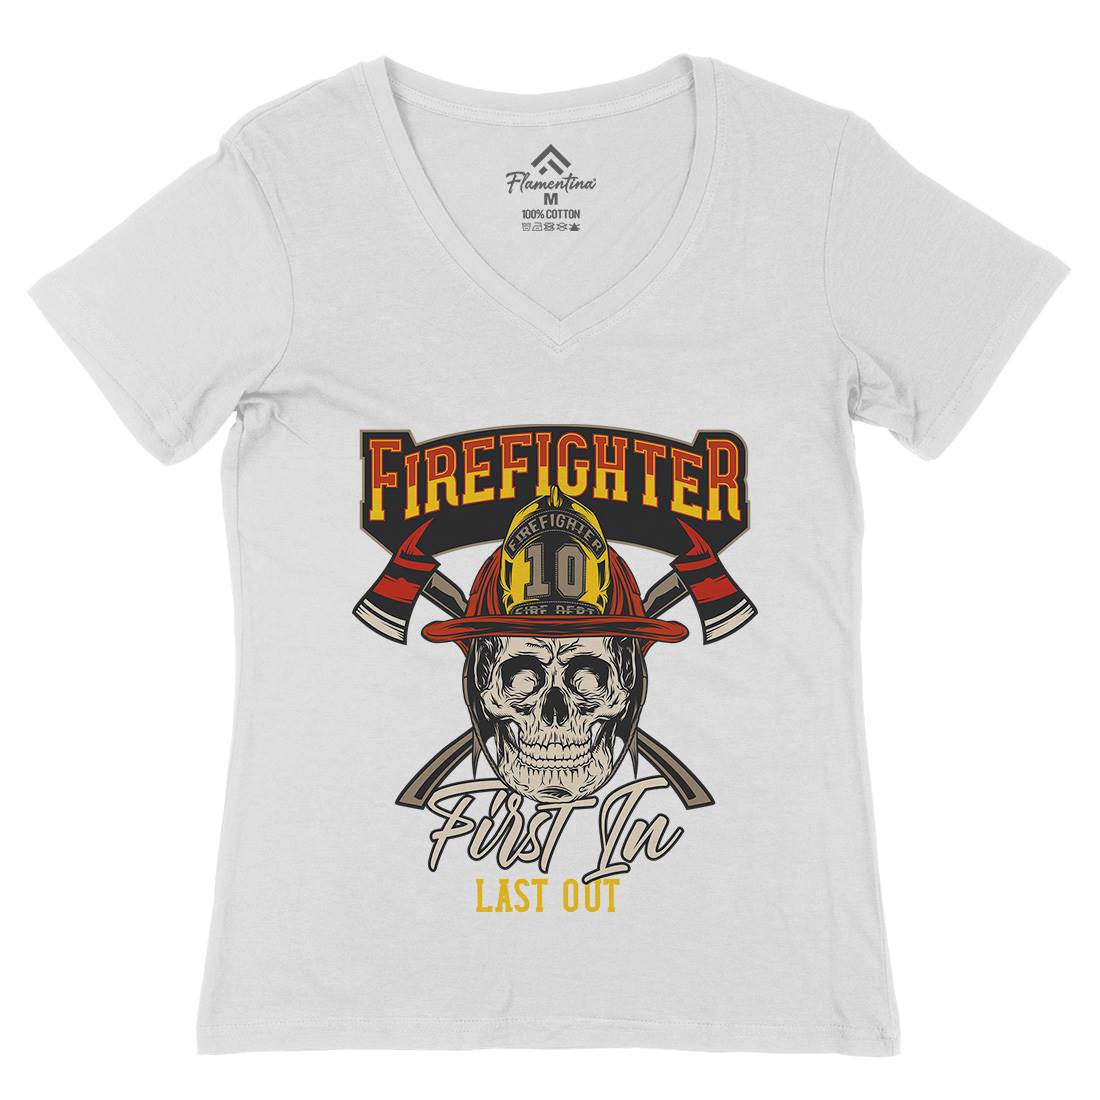 First In Last Out Womens Organic V-Neck T-Shirt Firefighters D933